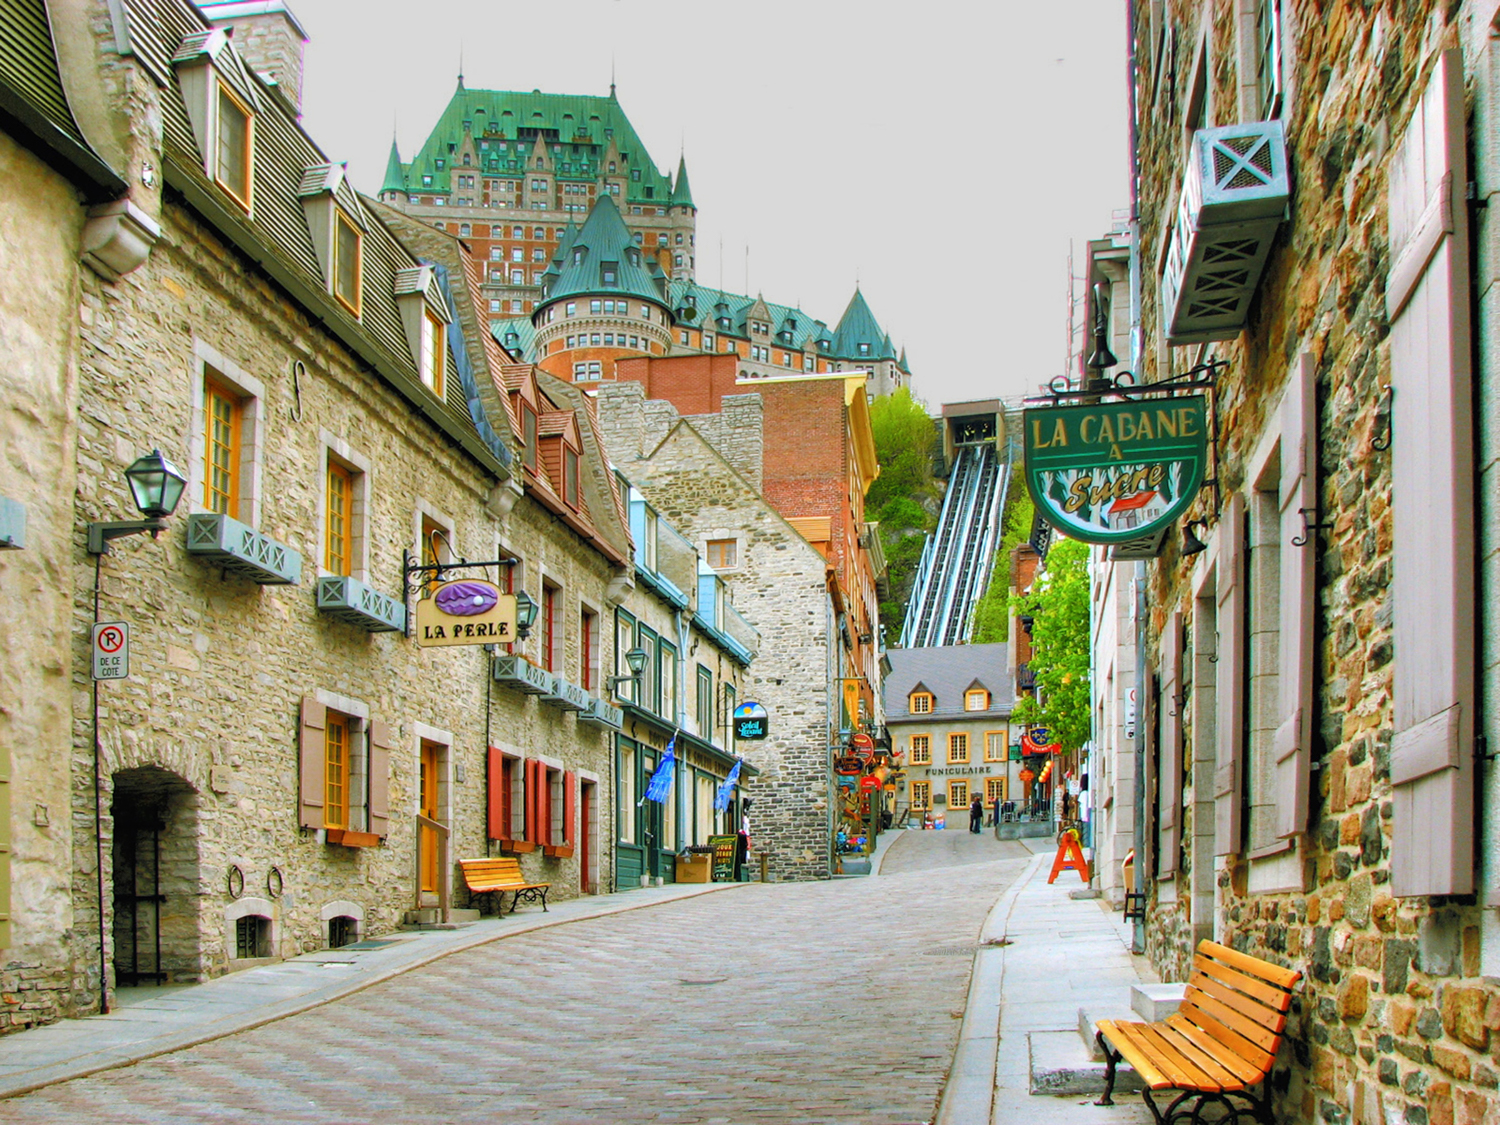 Québec City’s cobblestone streets make for a perfect walking tour. Image by Nino H. Photography / Moment / Getty